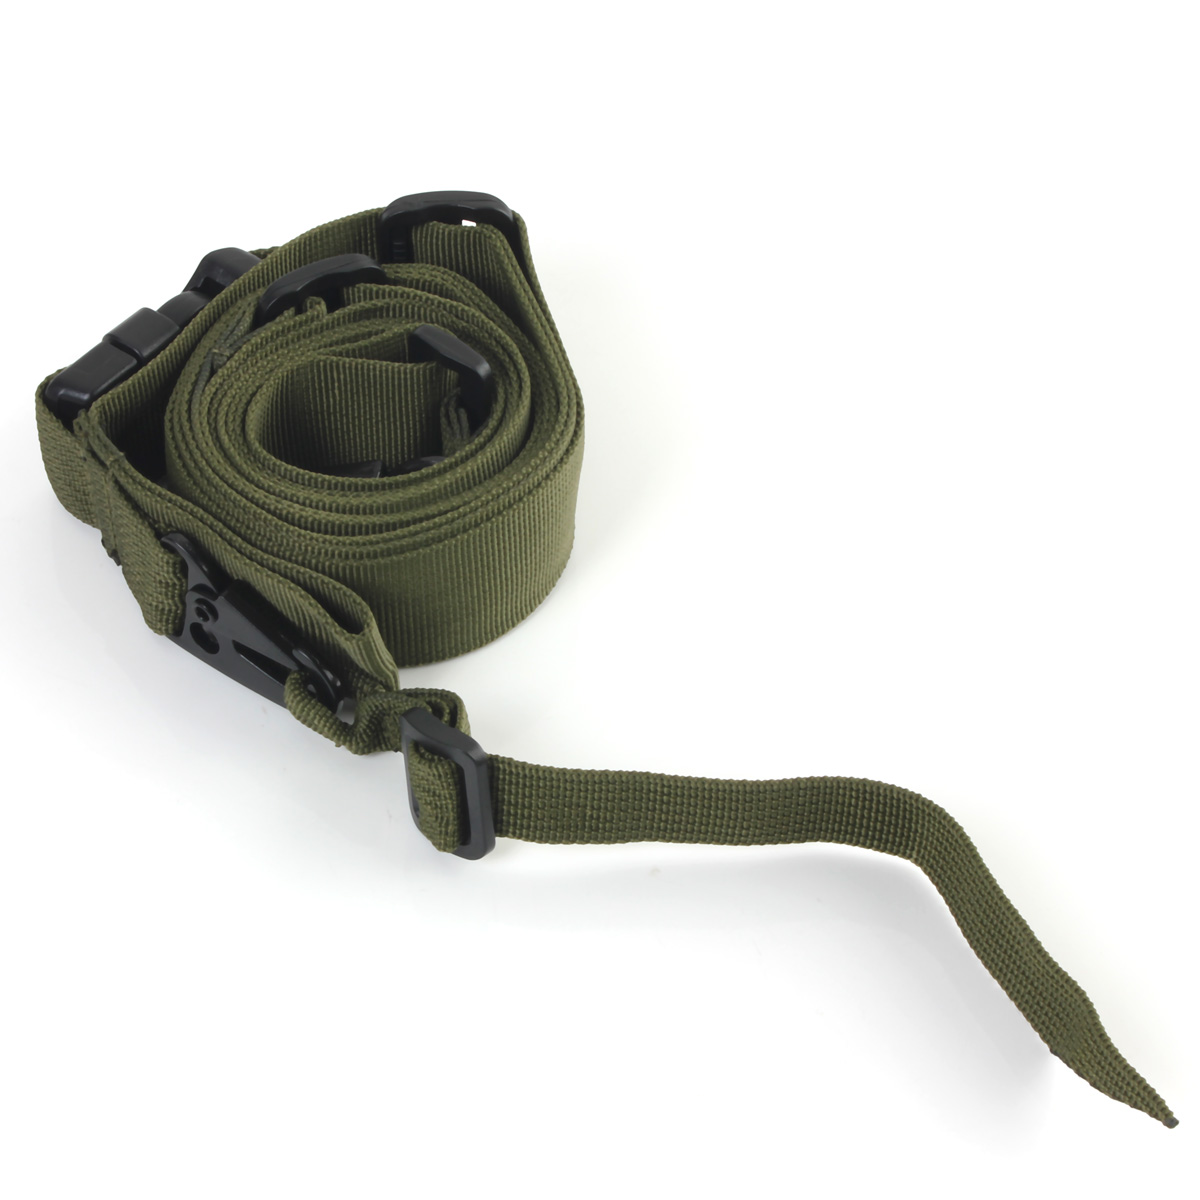 High quality Three Point Rifle Sling Adjustable Bungee Tactical Airsoft Gun Strap Paintball Gun Sling for